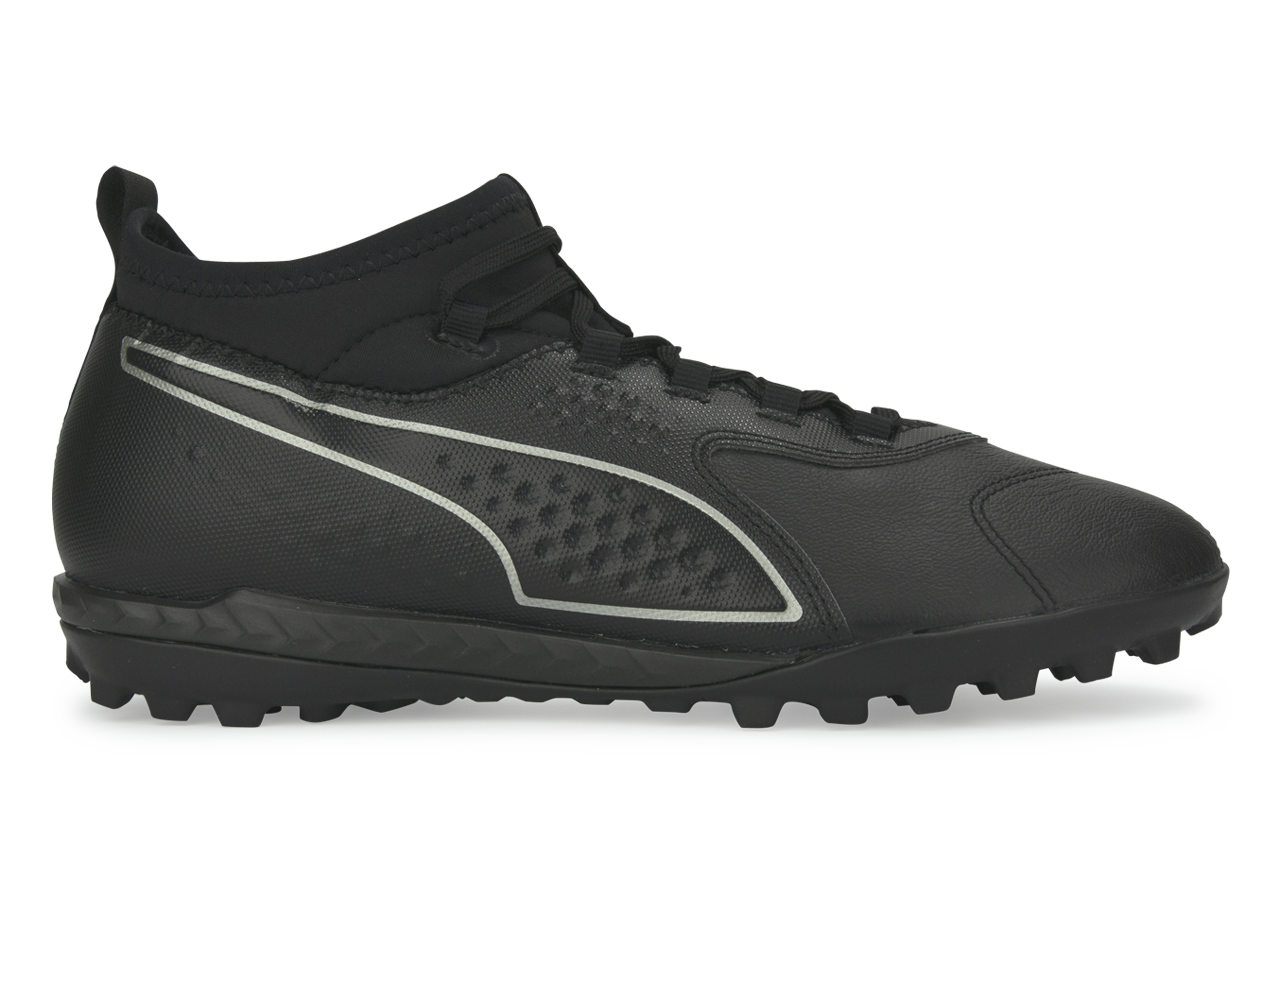 PUMA Men's ONE 3 Leather Turf Soccer Shoes Black